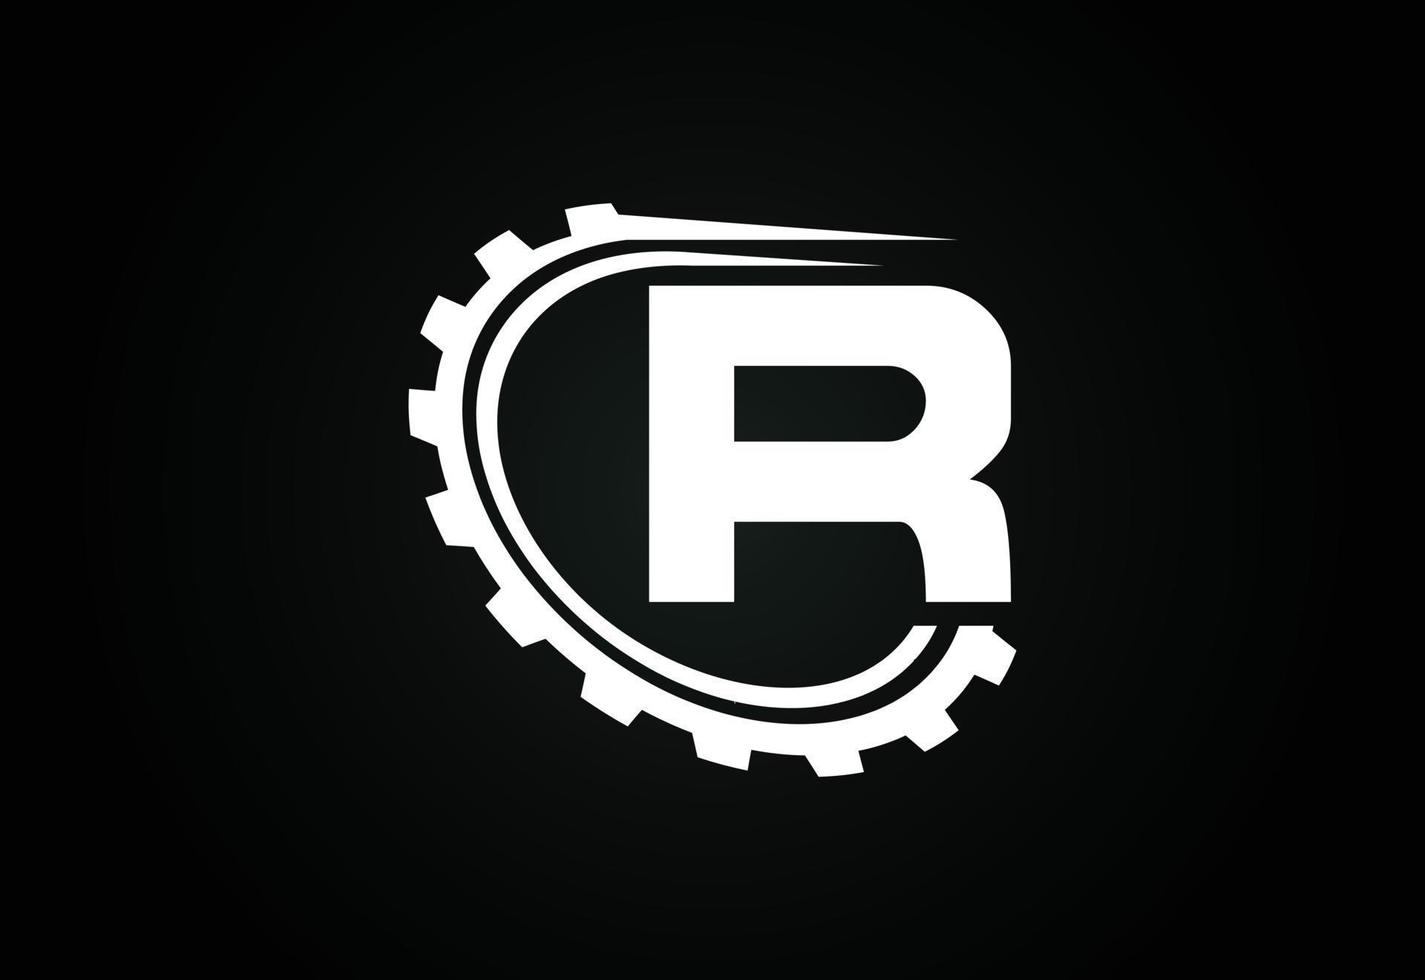 Initial R alphabet with a gear. Gear engineer logo design. Logo for automotive, mechanical, technology, setting, repair business, and company identity vector